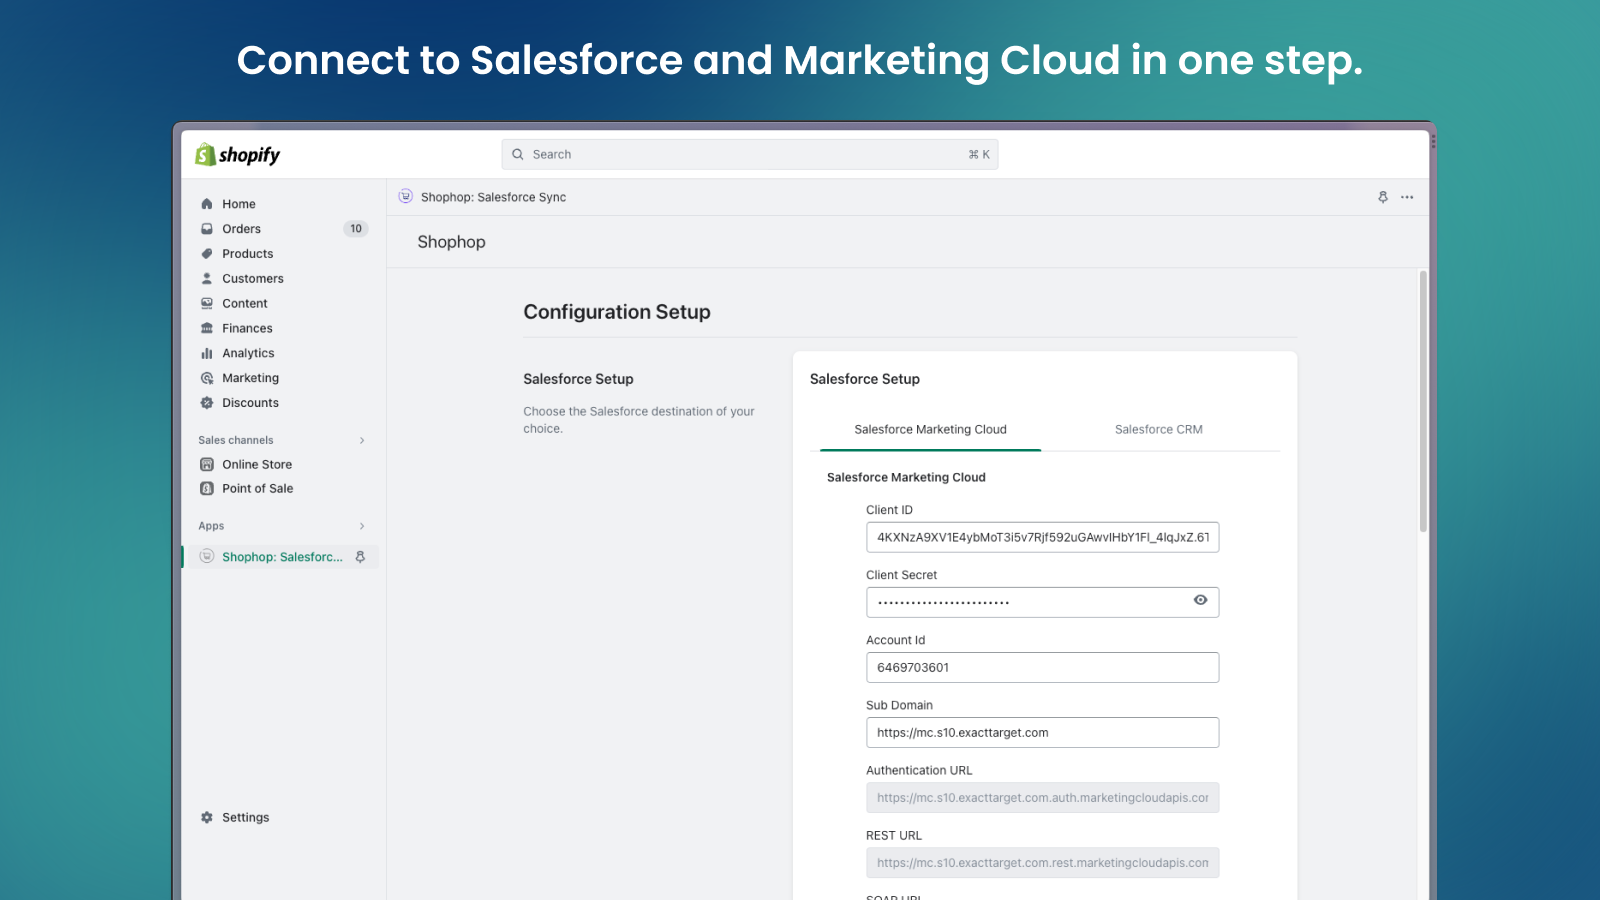 Connect to Salesforce and Marketing Cloud in one step.